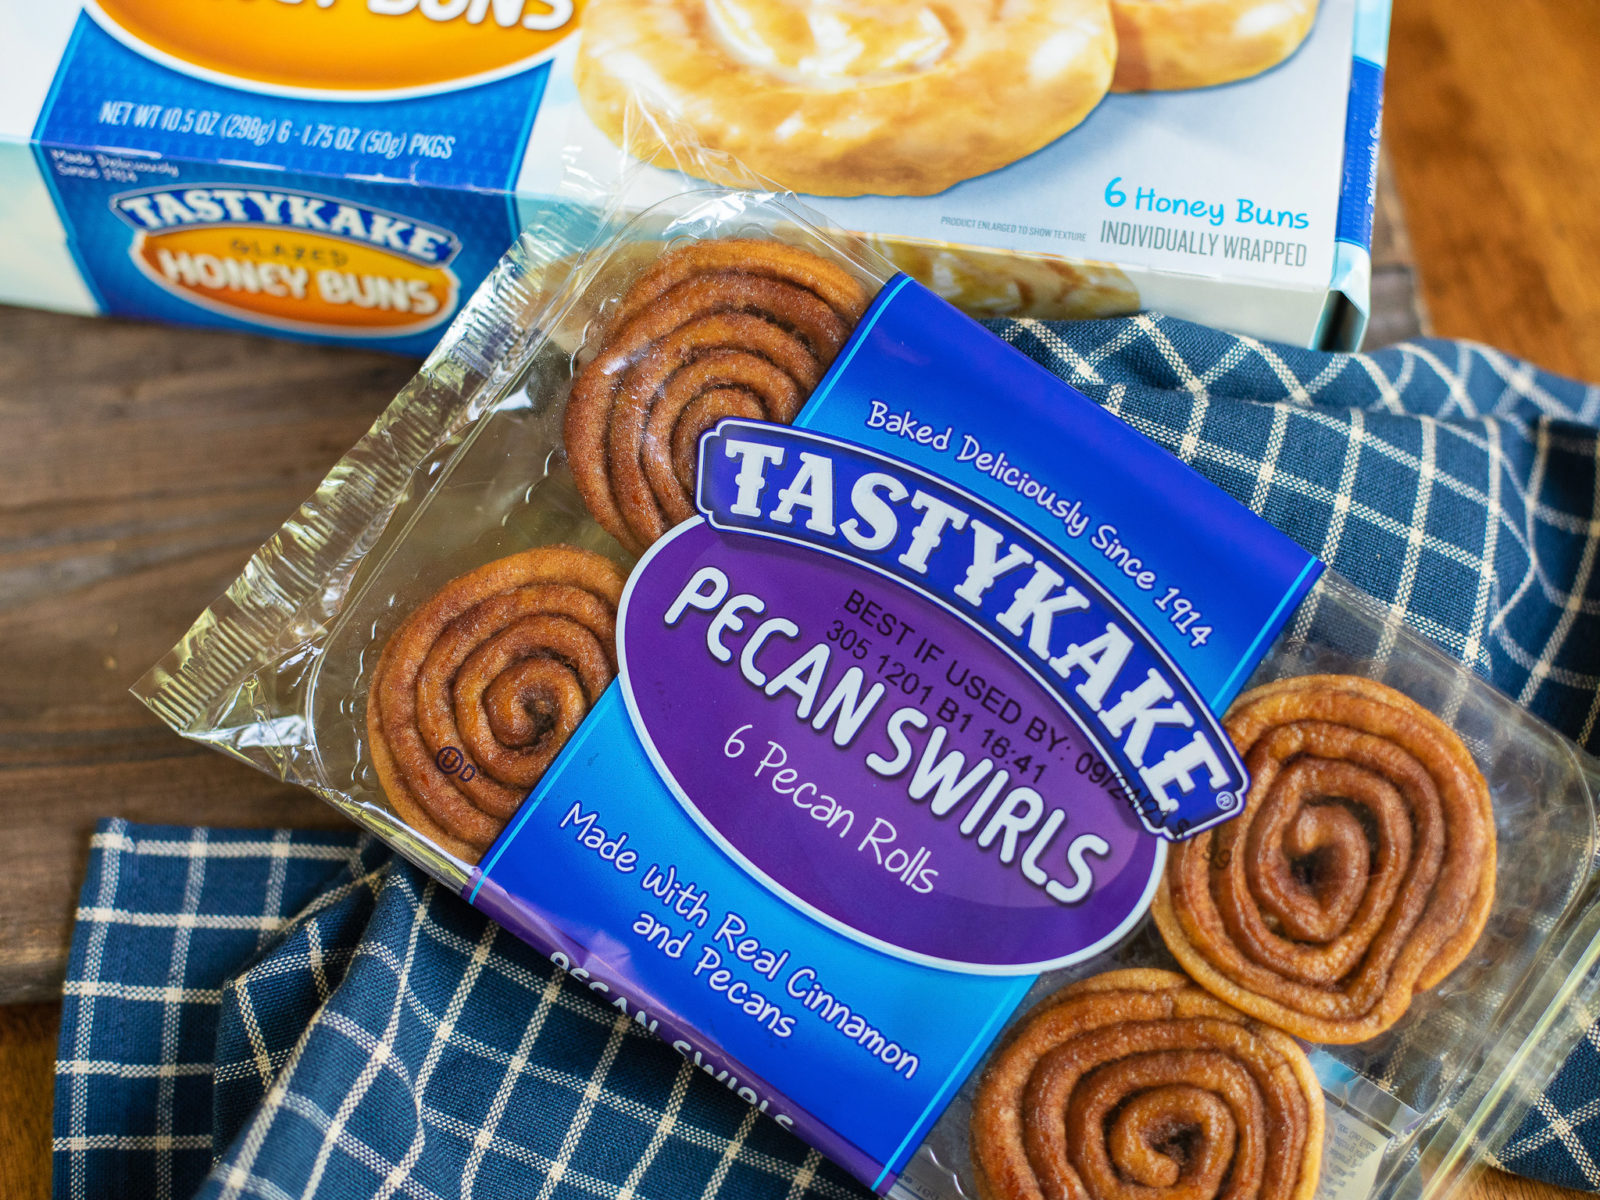 New Tastykake Ibotta For The Publix BOGO Sale – Products As Low As 40¢